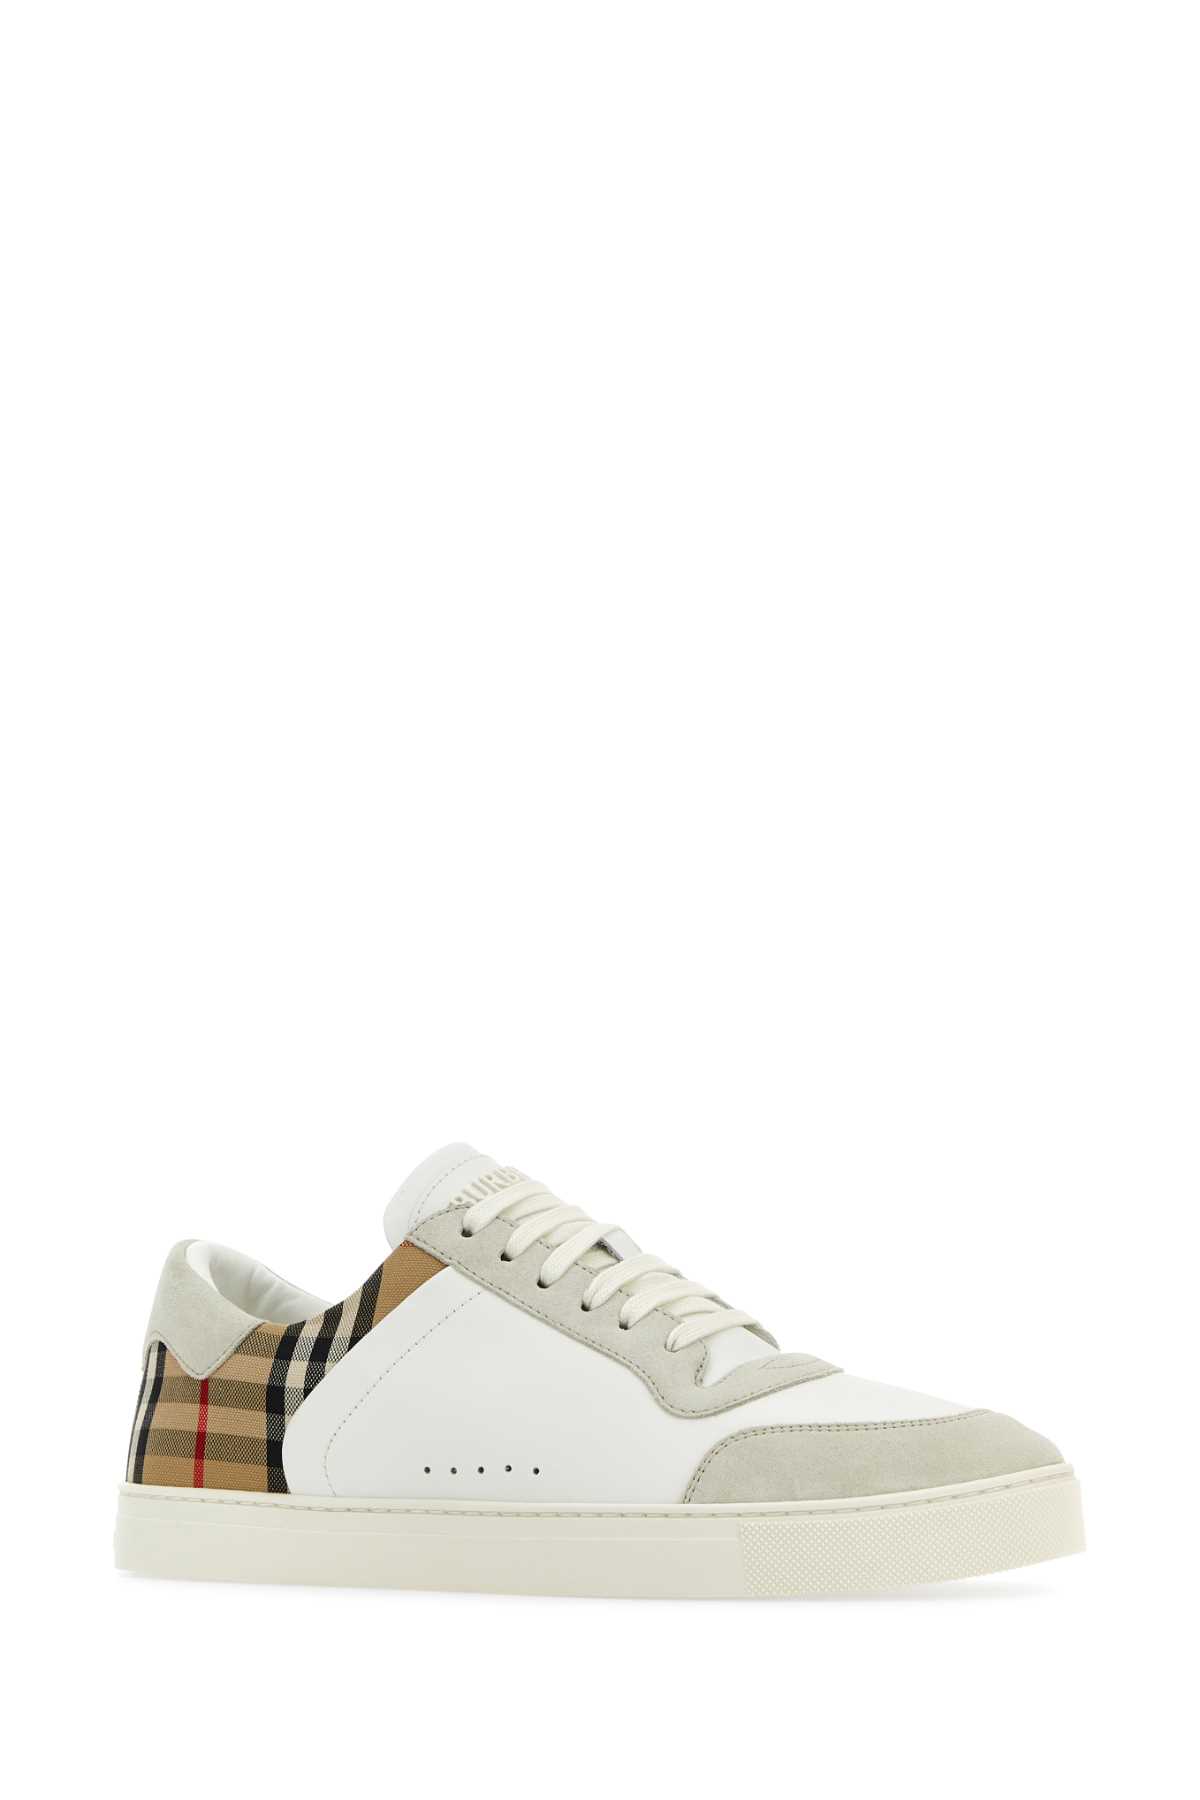 Shop Burberry Multicolor Suede And Leather Sneakers In Ntwhtarbeigeipchk